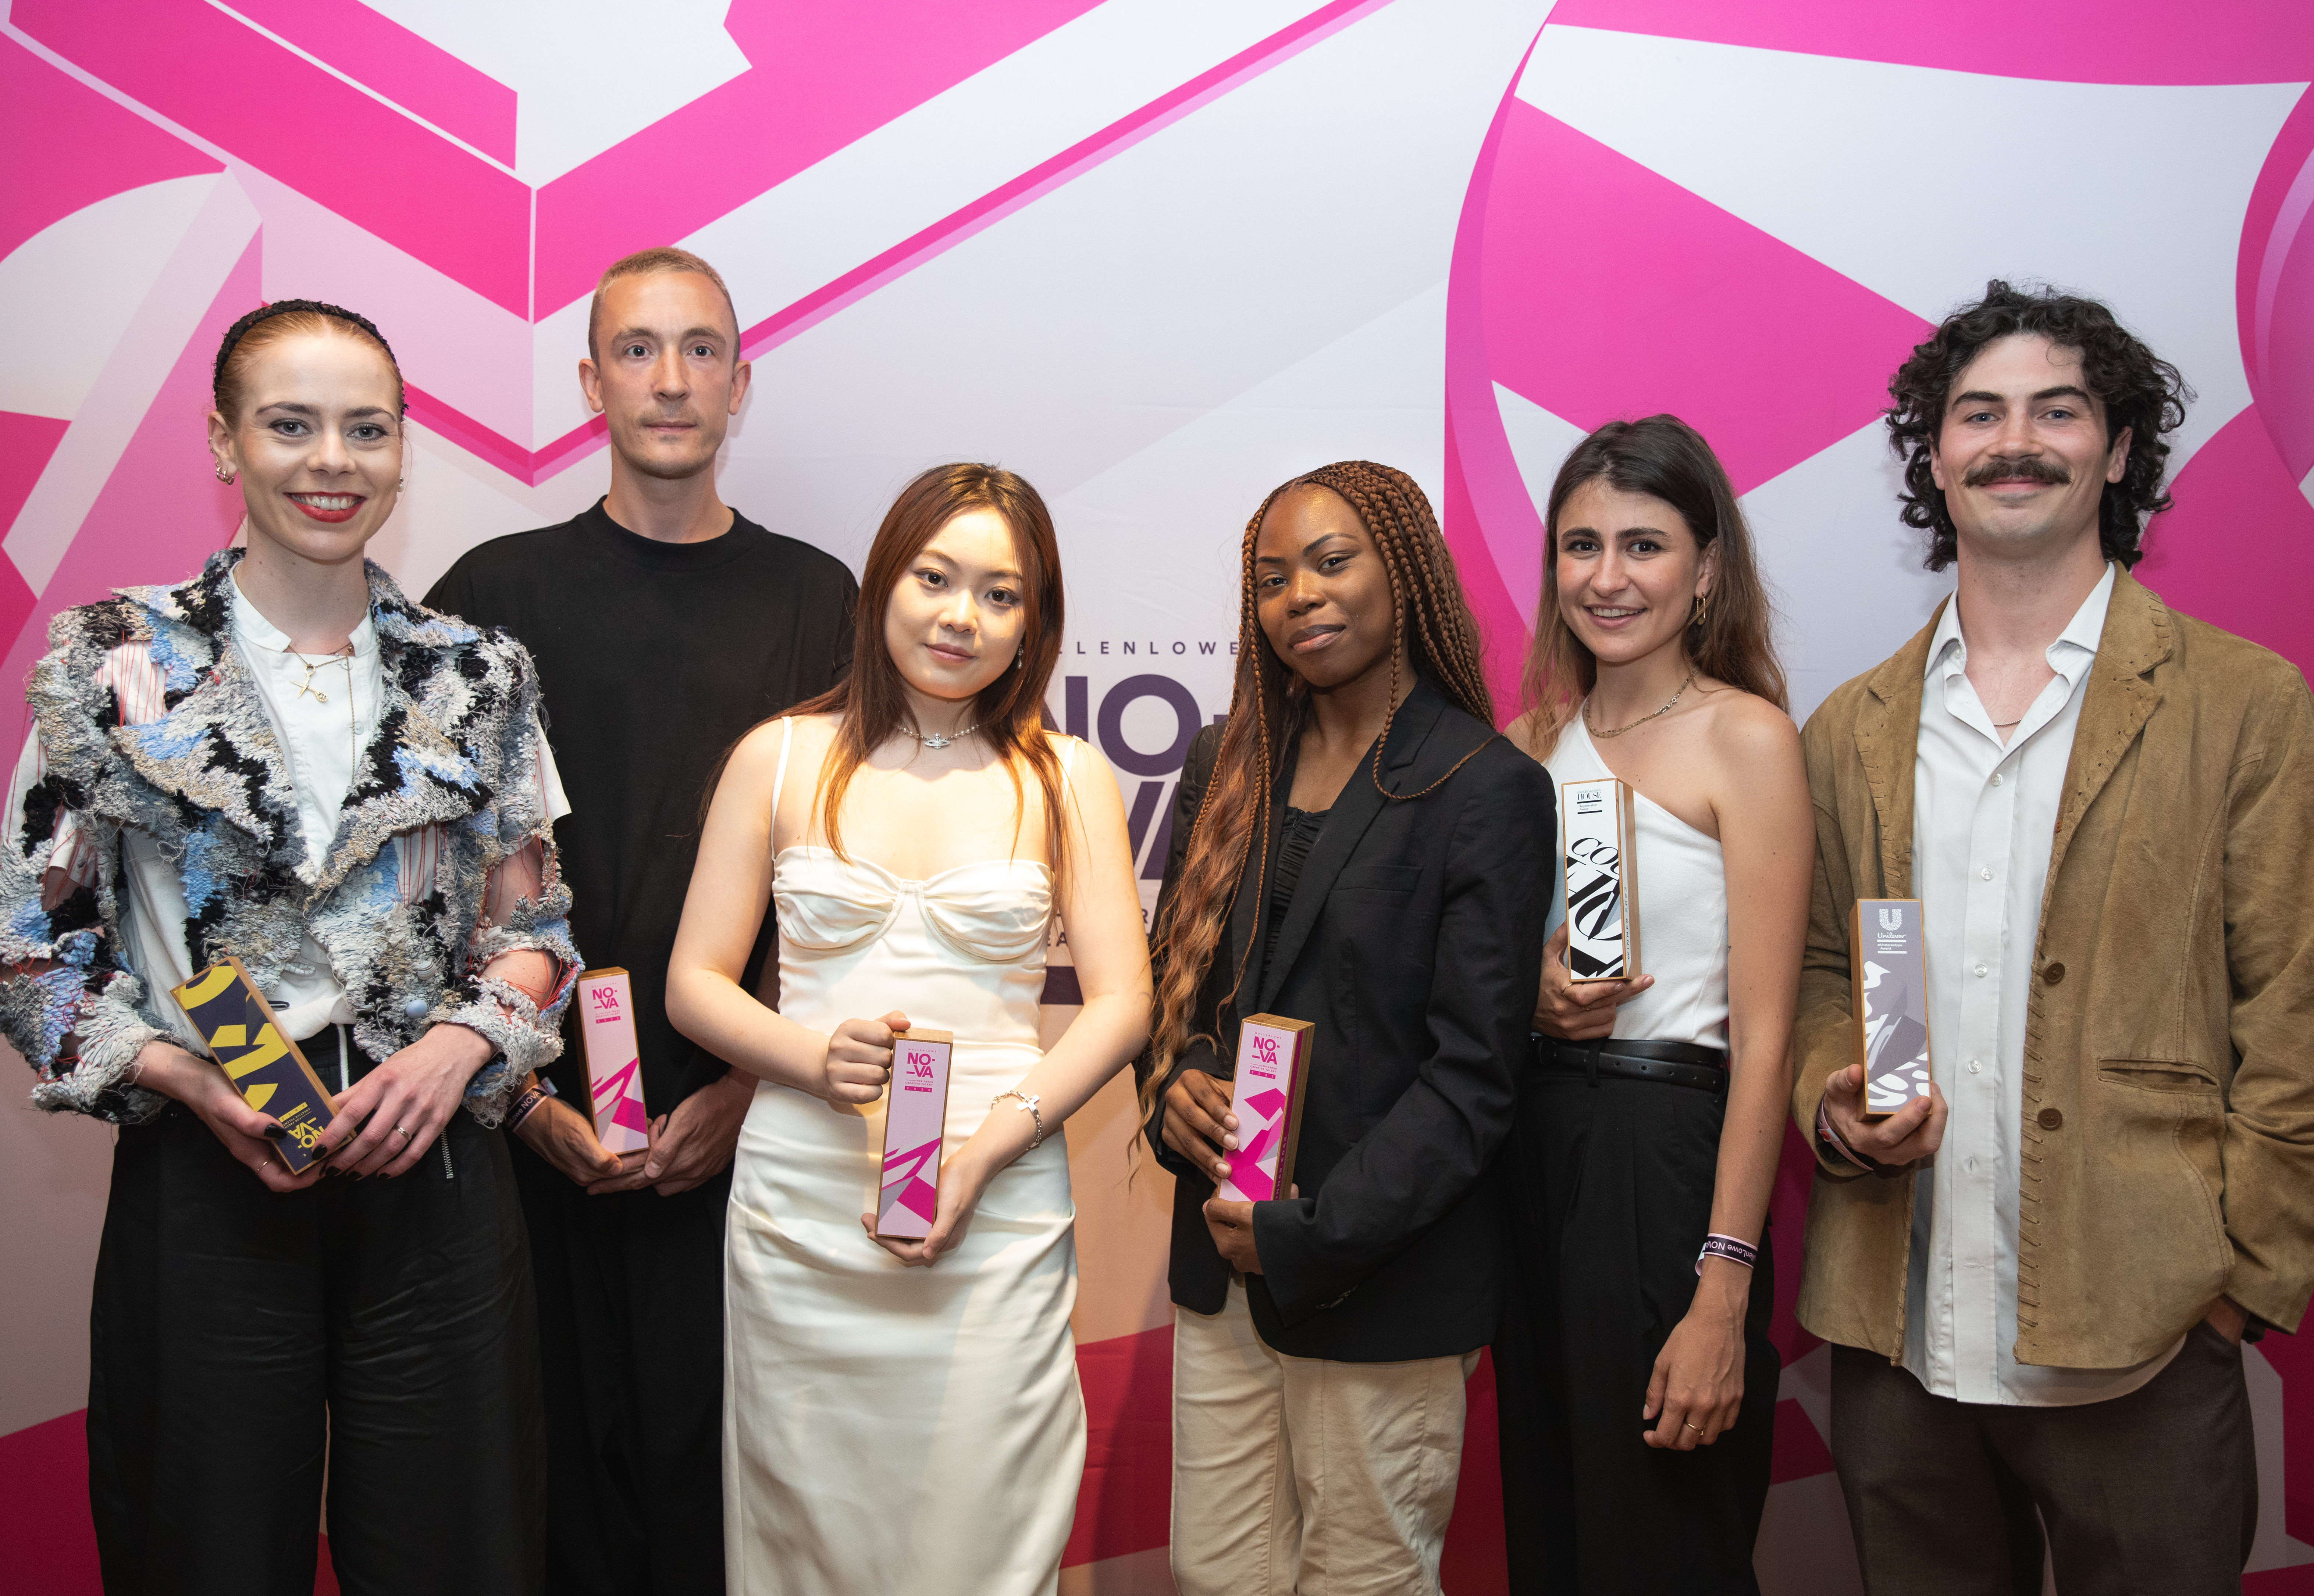 A group shot of the winners at the award ceremony